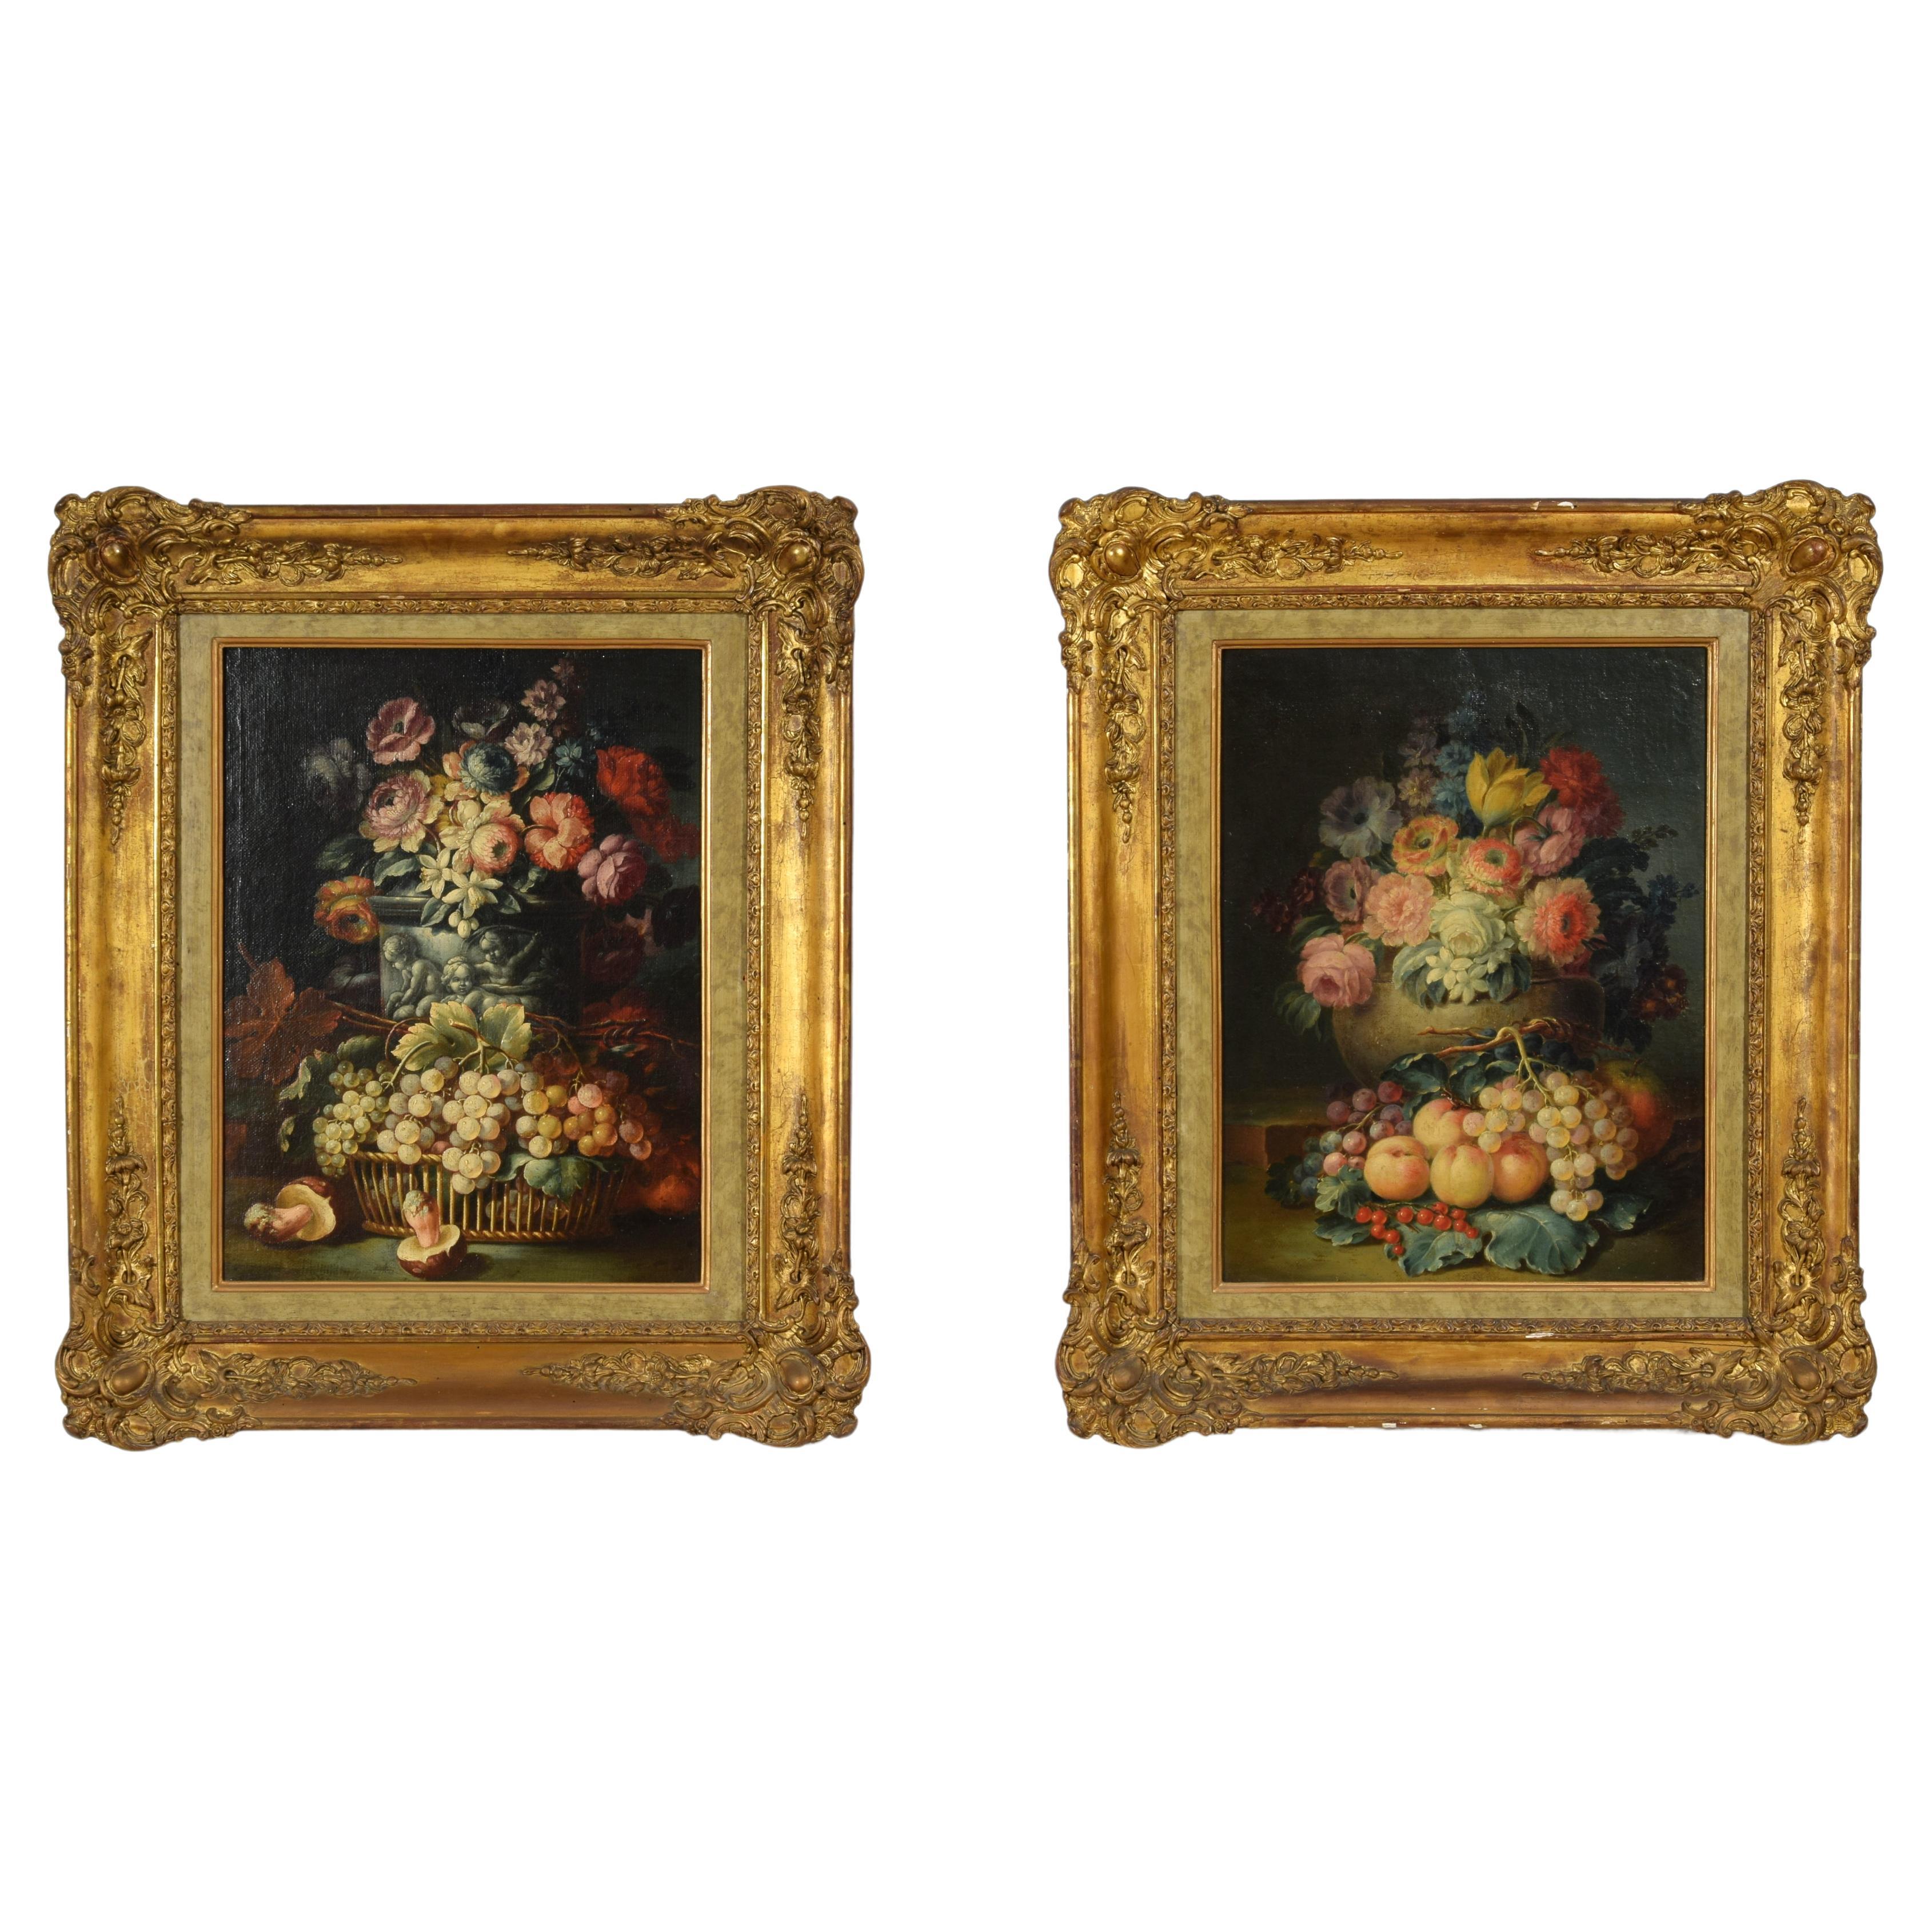 18th Century, Two Still Lifes with Flowers and Fruits by Italian Paintings For Sale